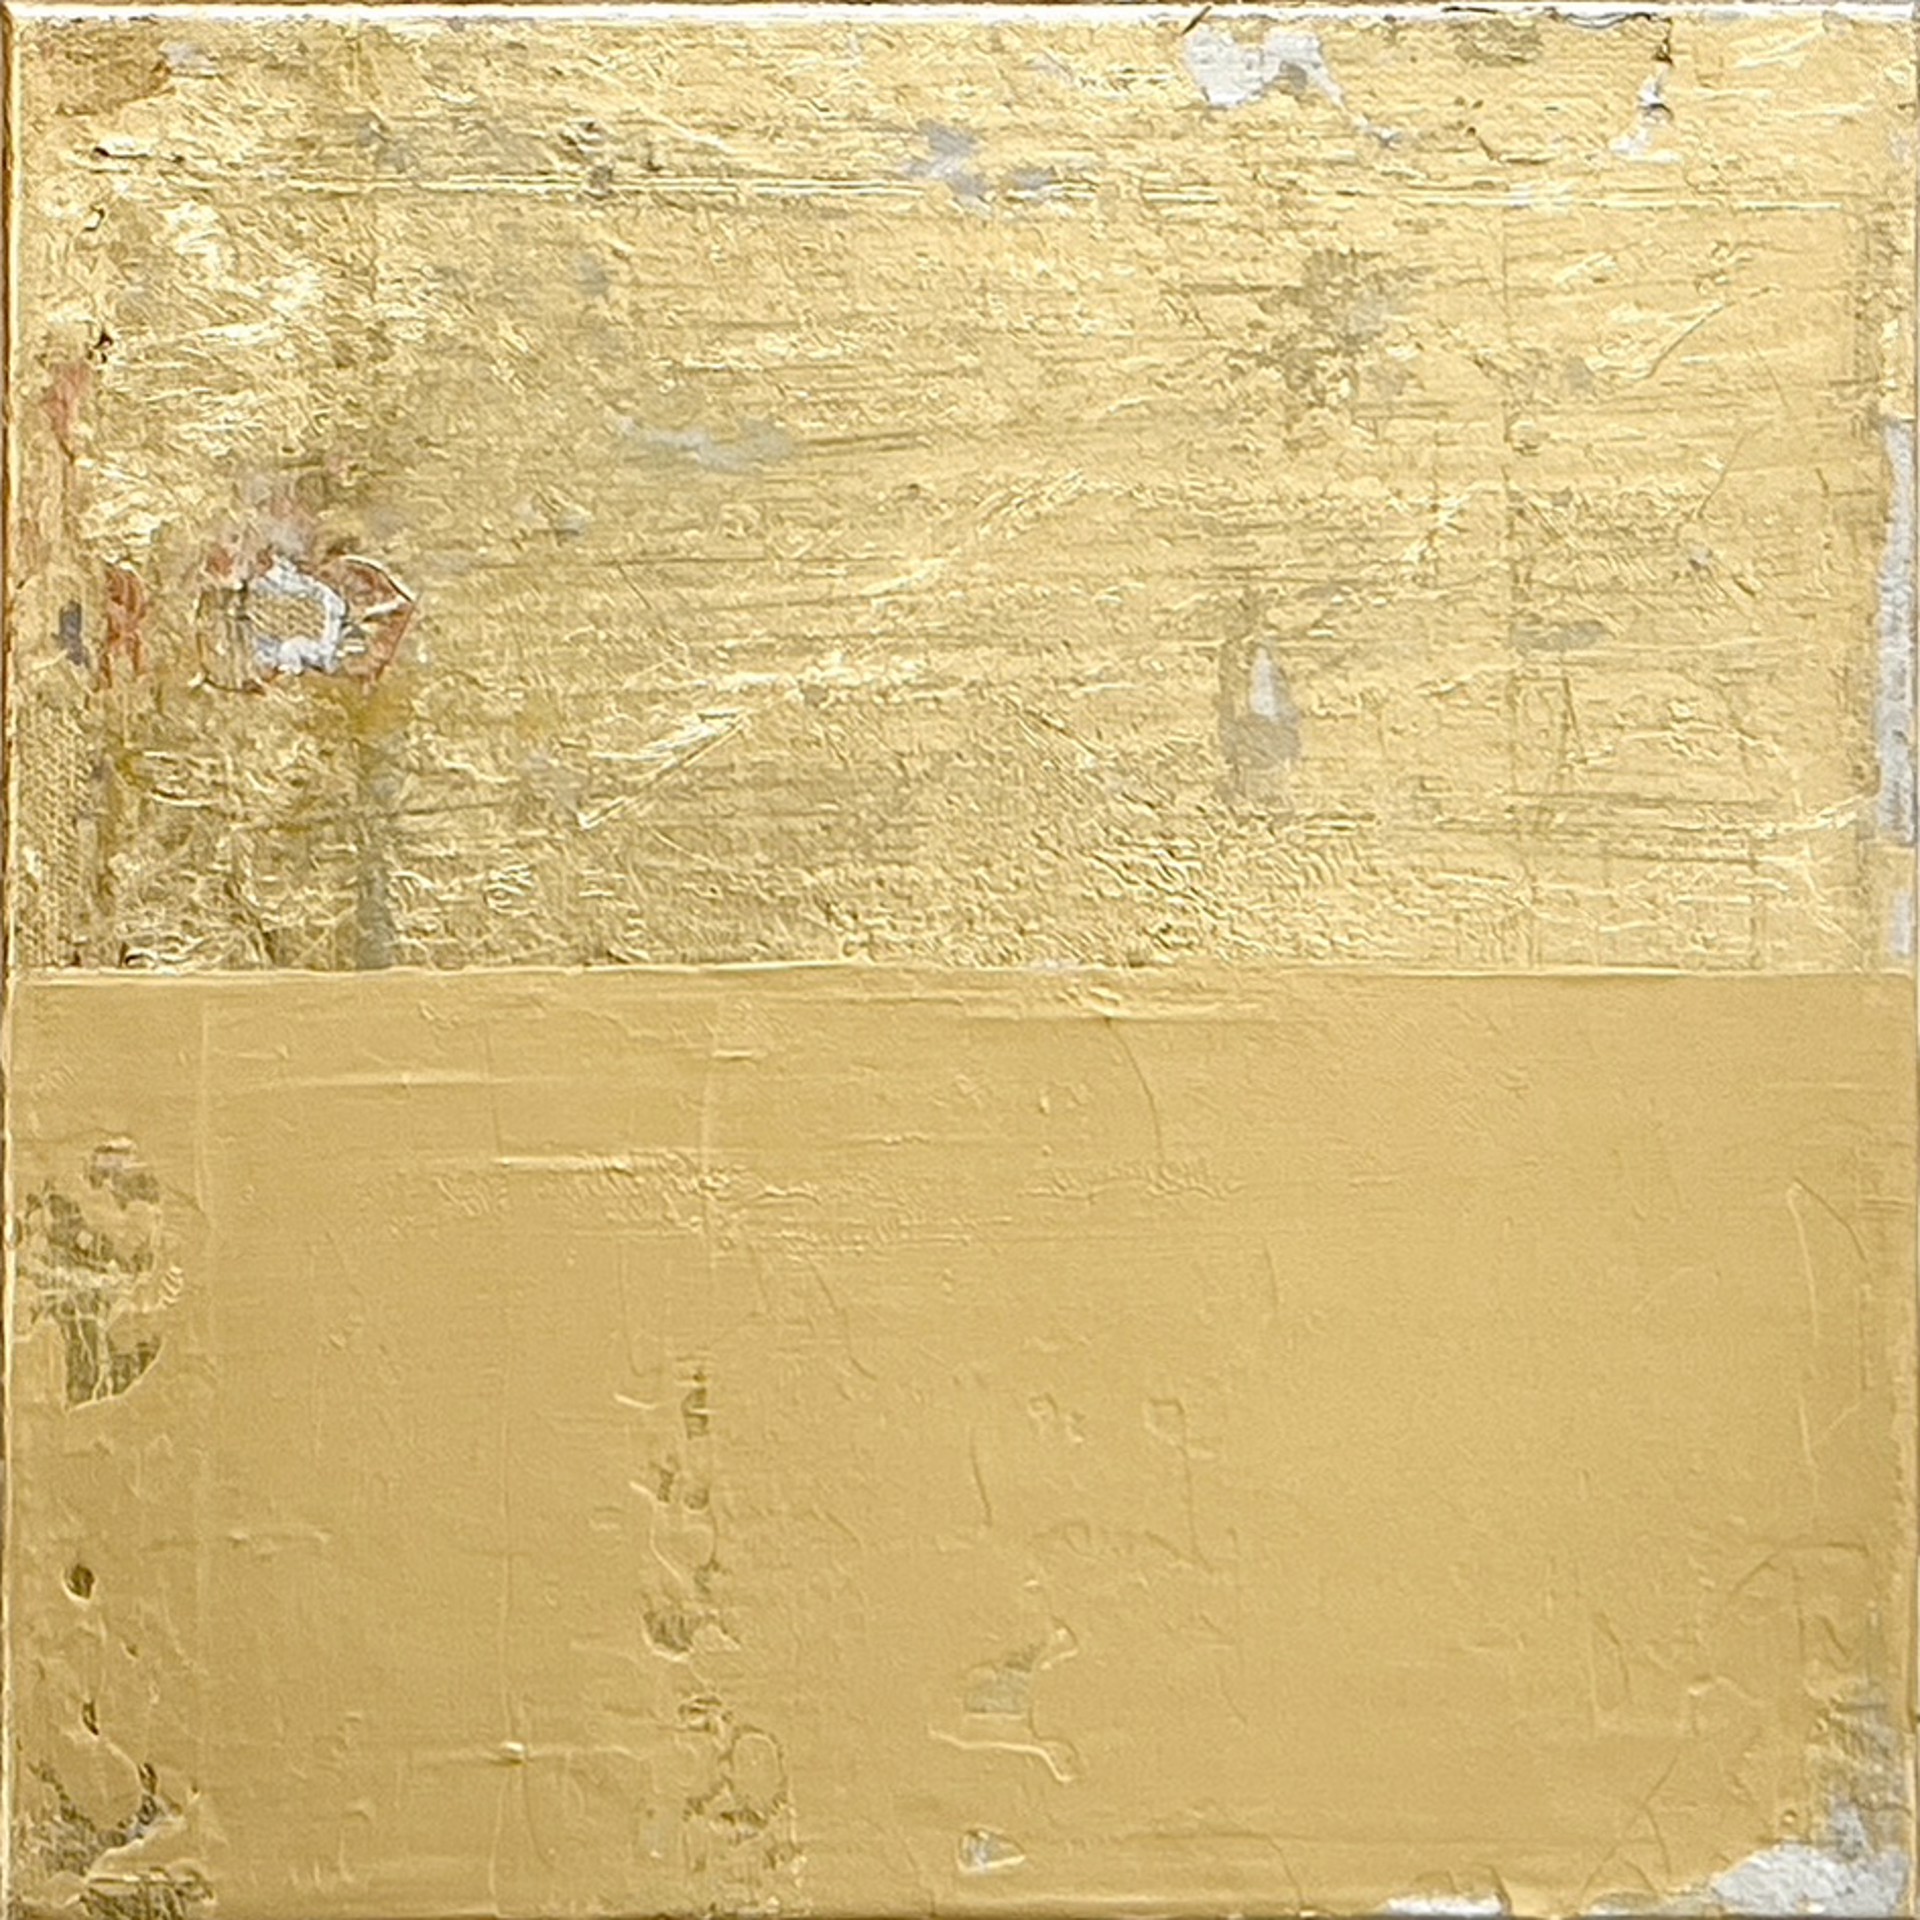 Gold And Gold (GG053) is 1 of 4 gold leaf mixed media panels from Japanese painter and artist Takefumi Hori.